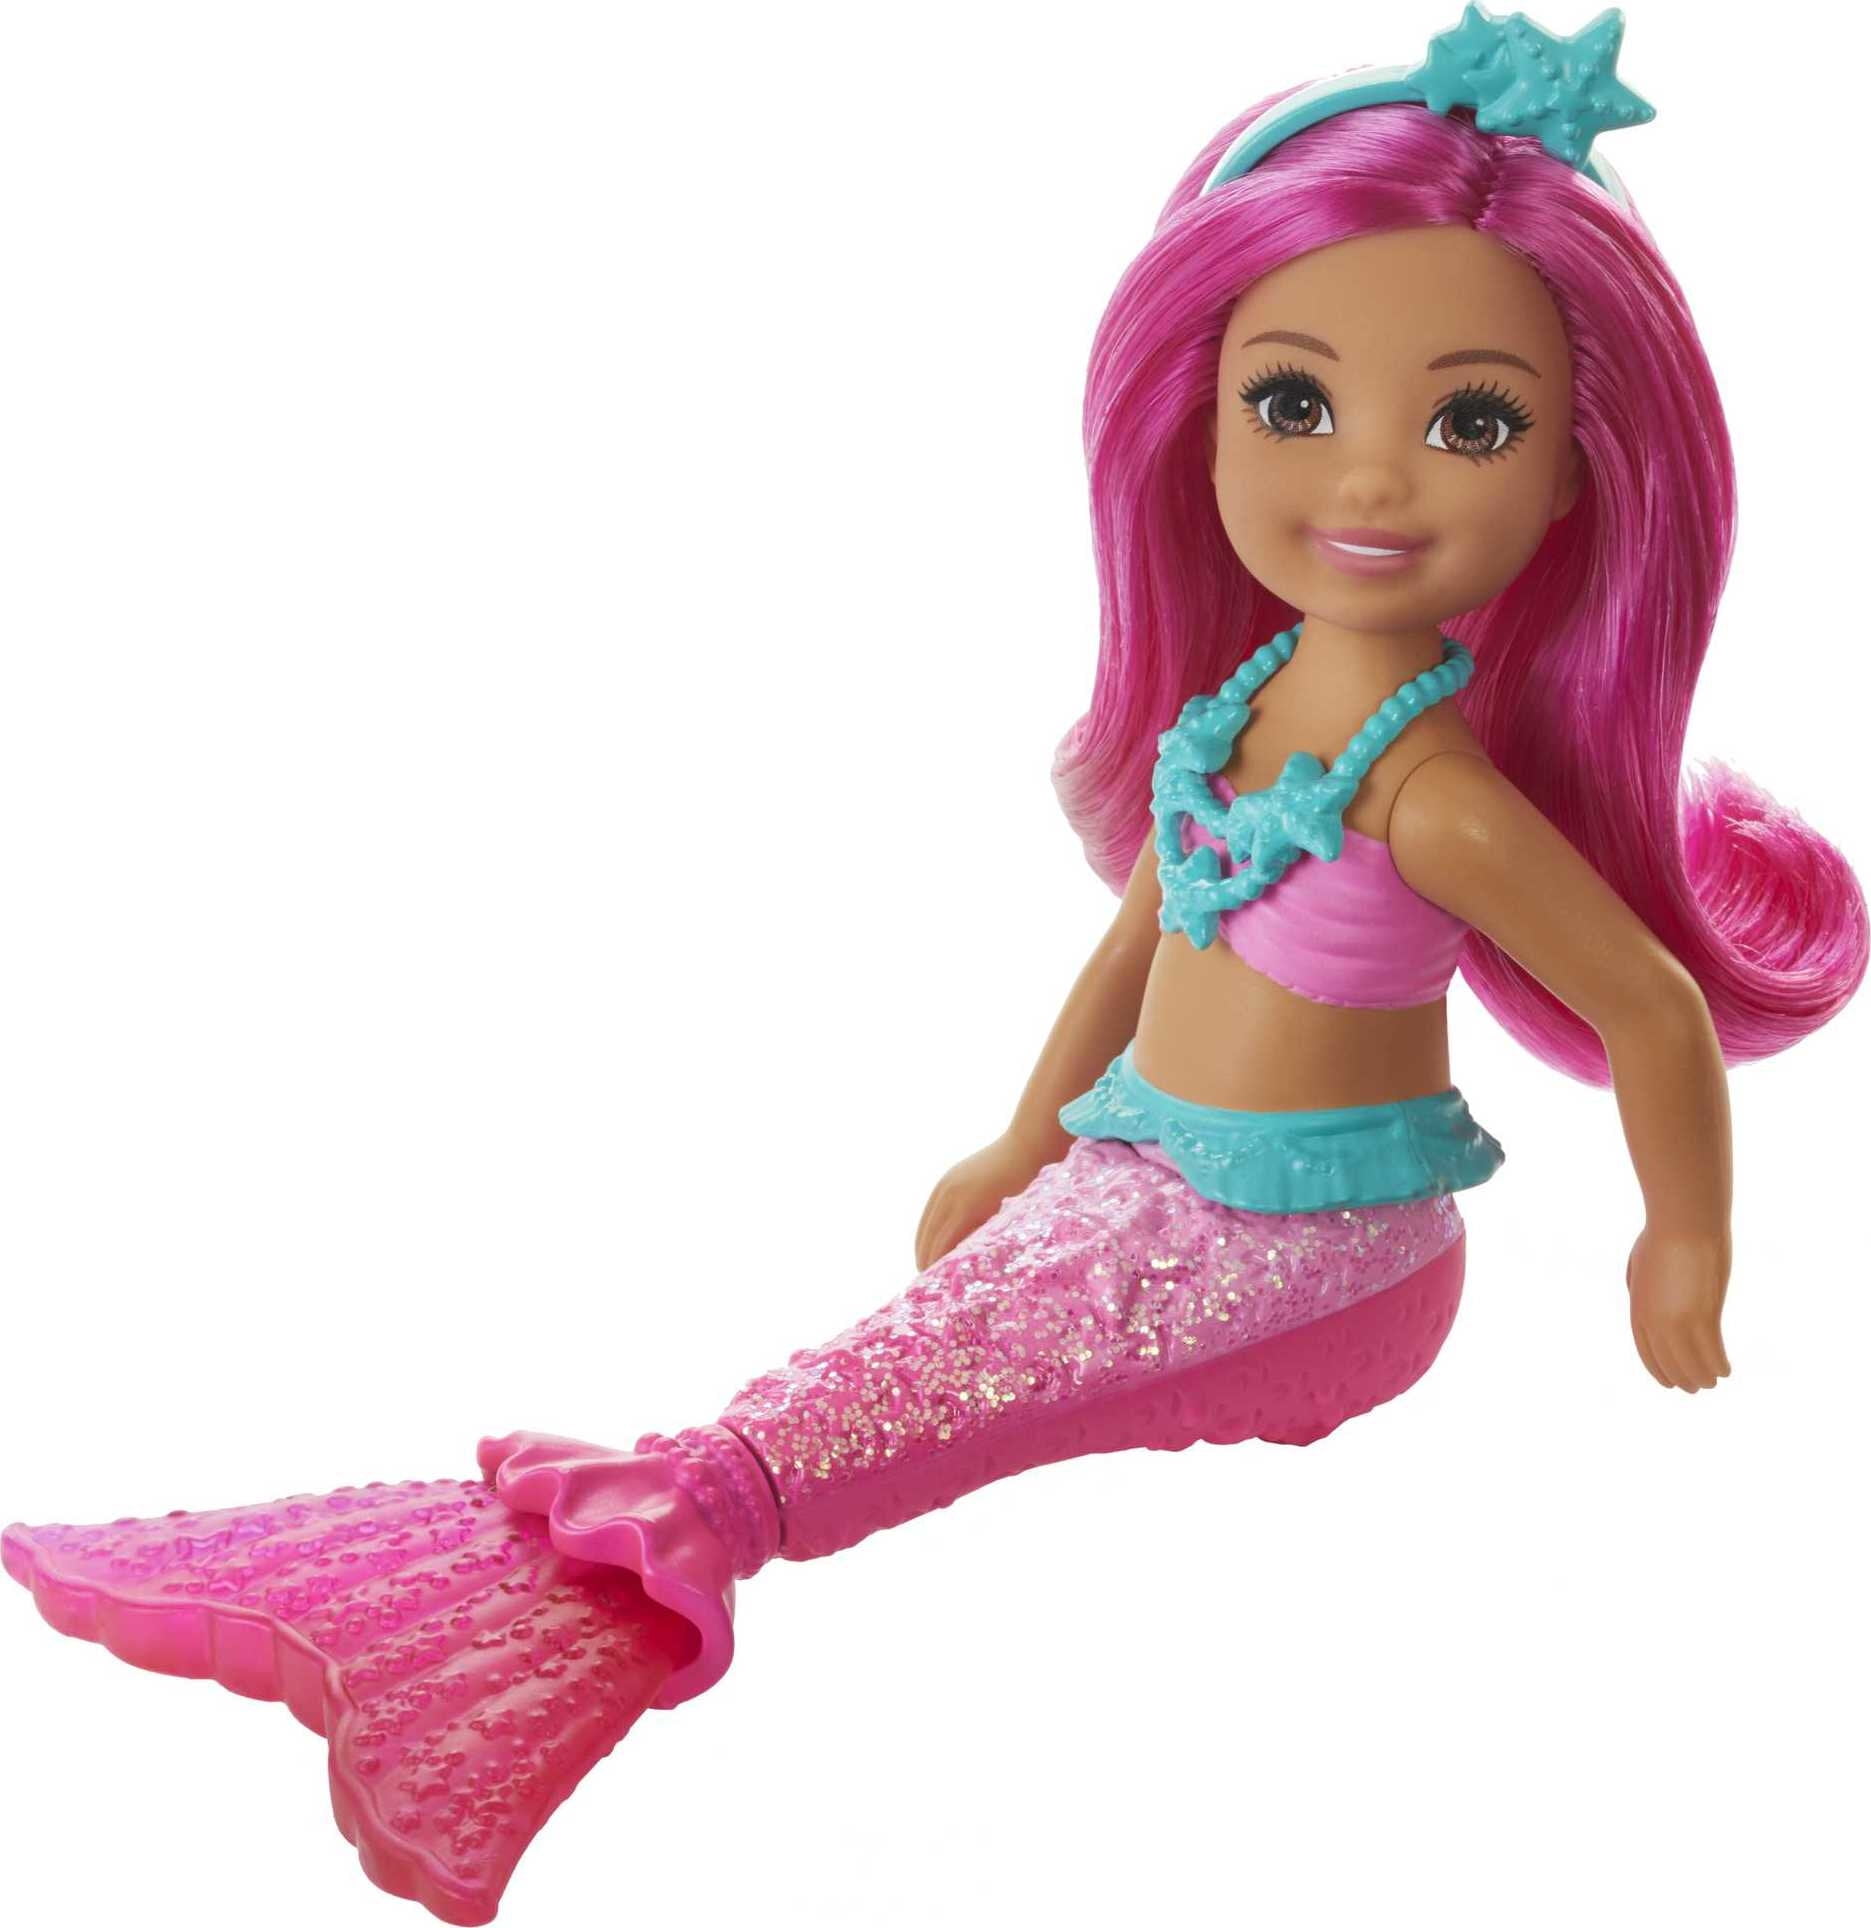 New Barbie Dreamtopia Mermaid dolls 2023, including ones with